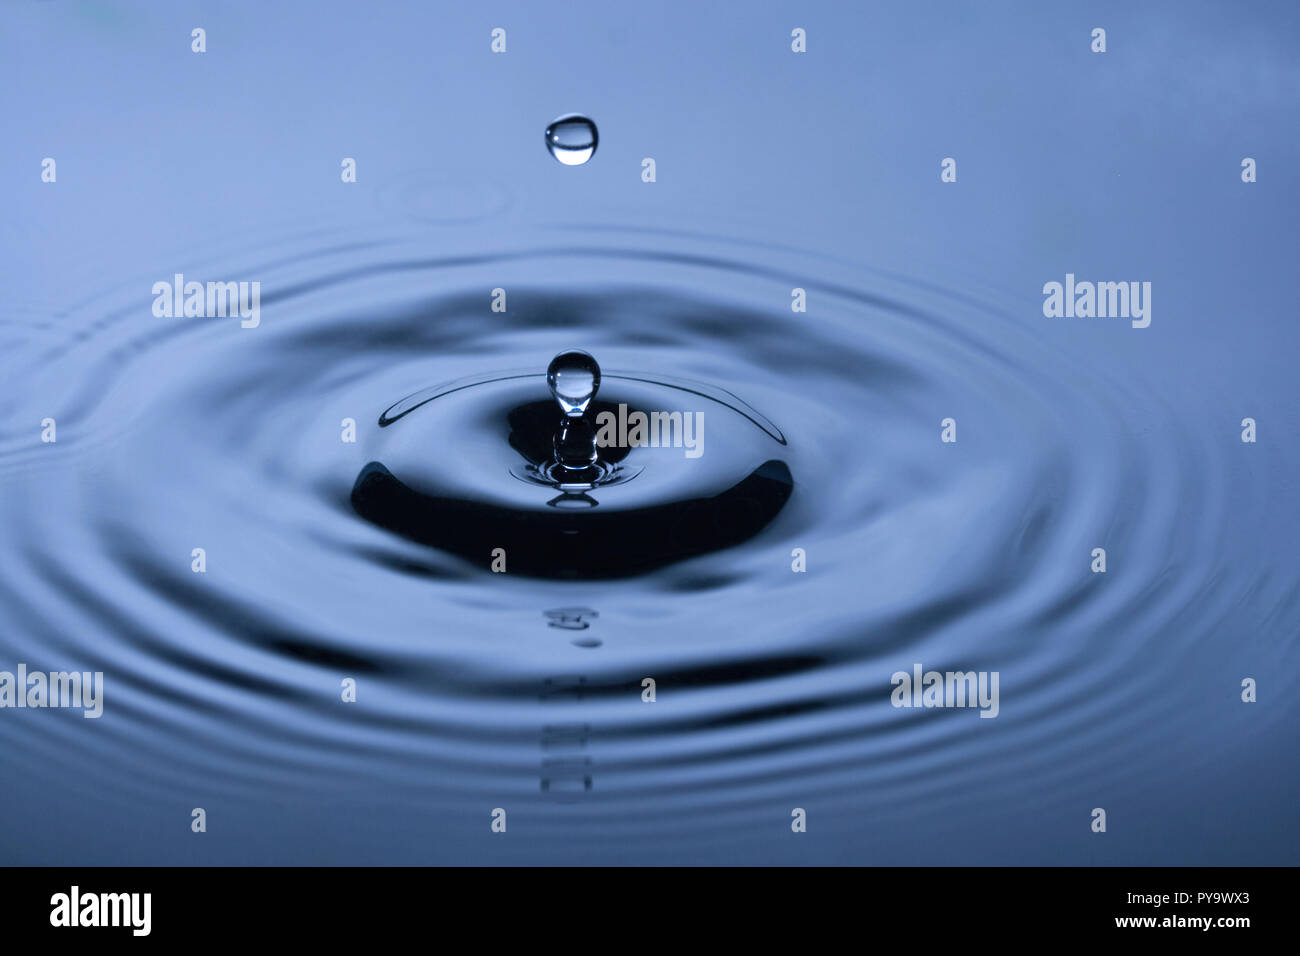 Drops of water creating ripples Stock Photo